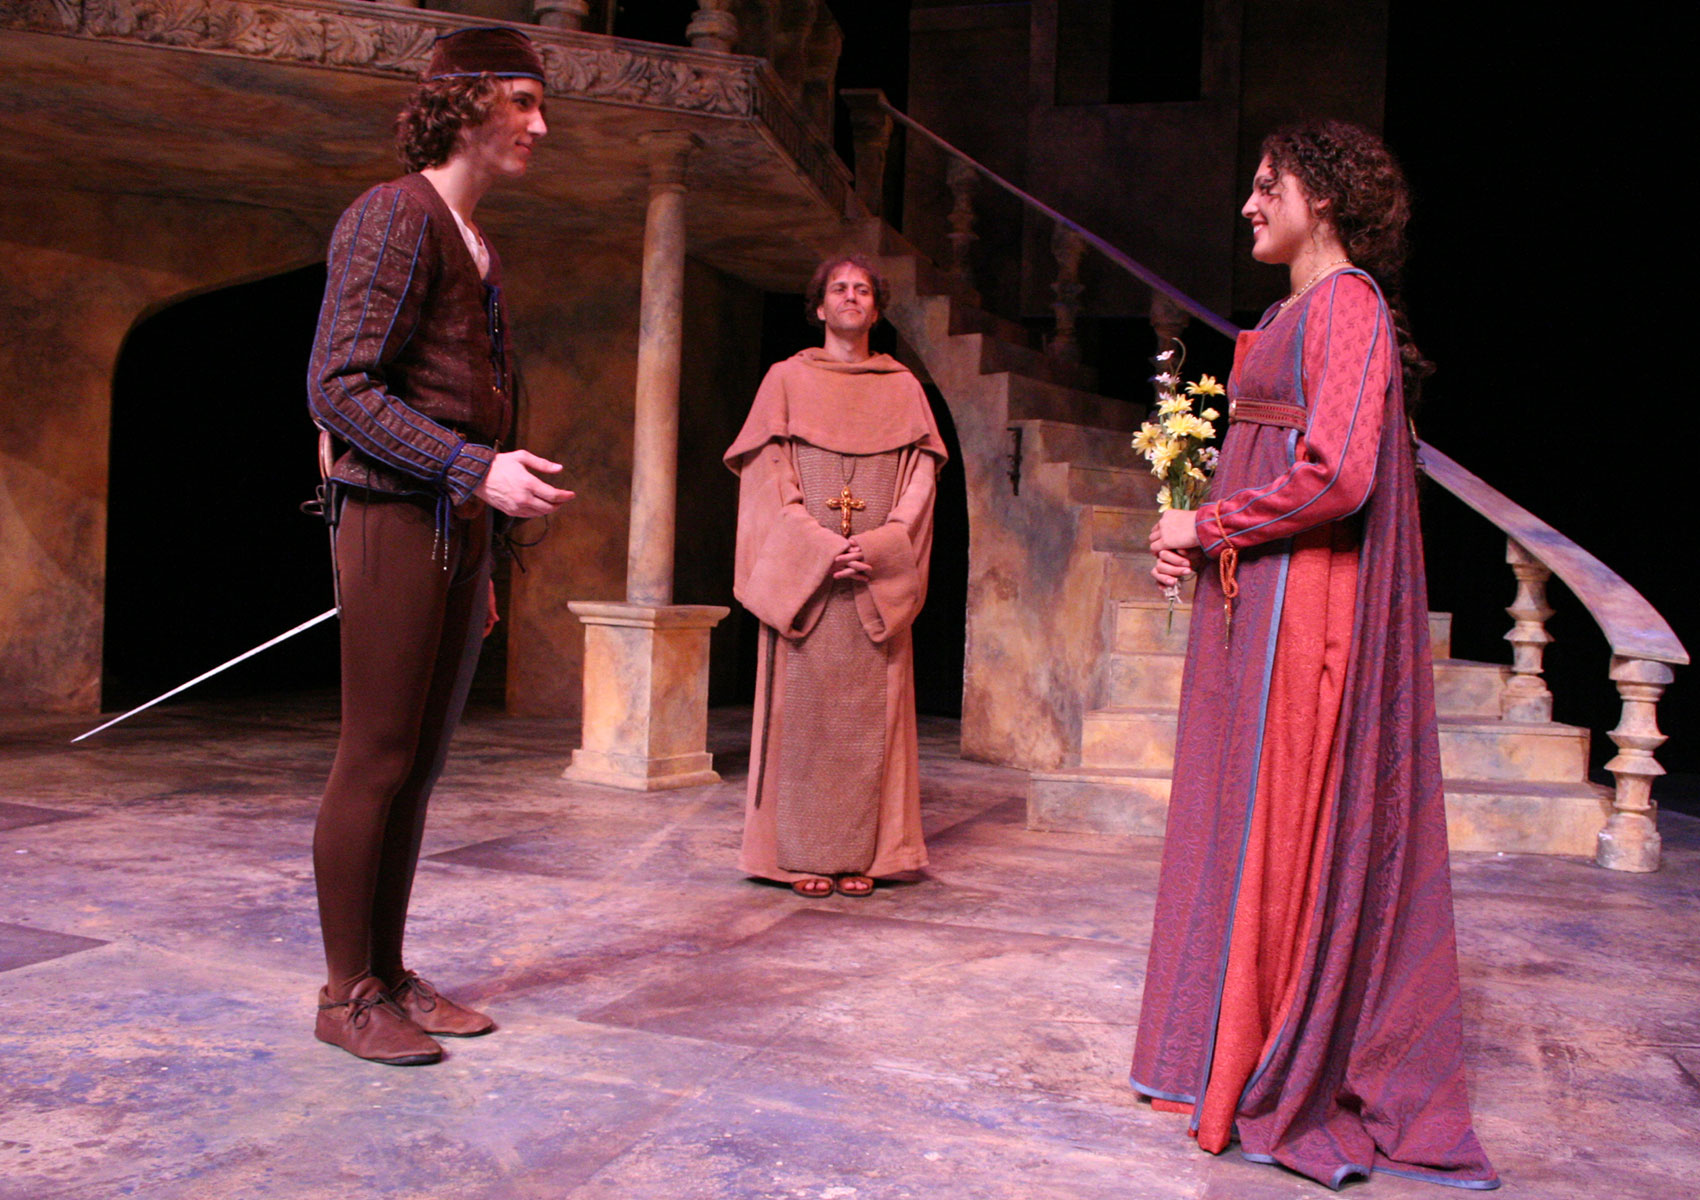 A man and a woman smile at each other while a man in friar attire watches them from behind.